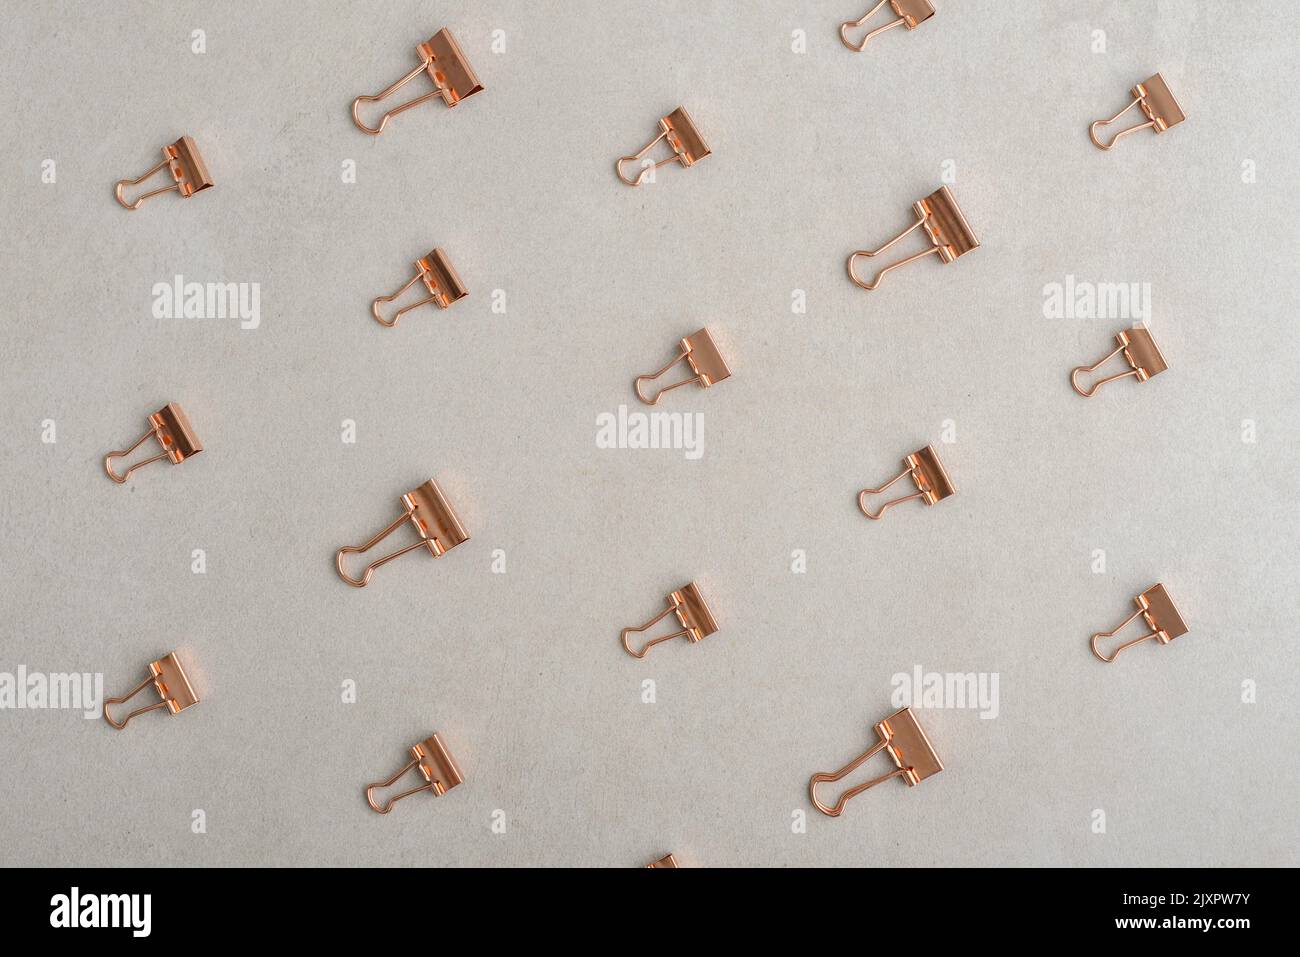 Golden paper binder clips pattern on light concrete background, top view. Office supplies background Stock Photo